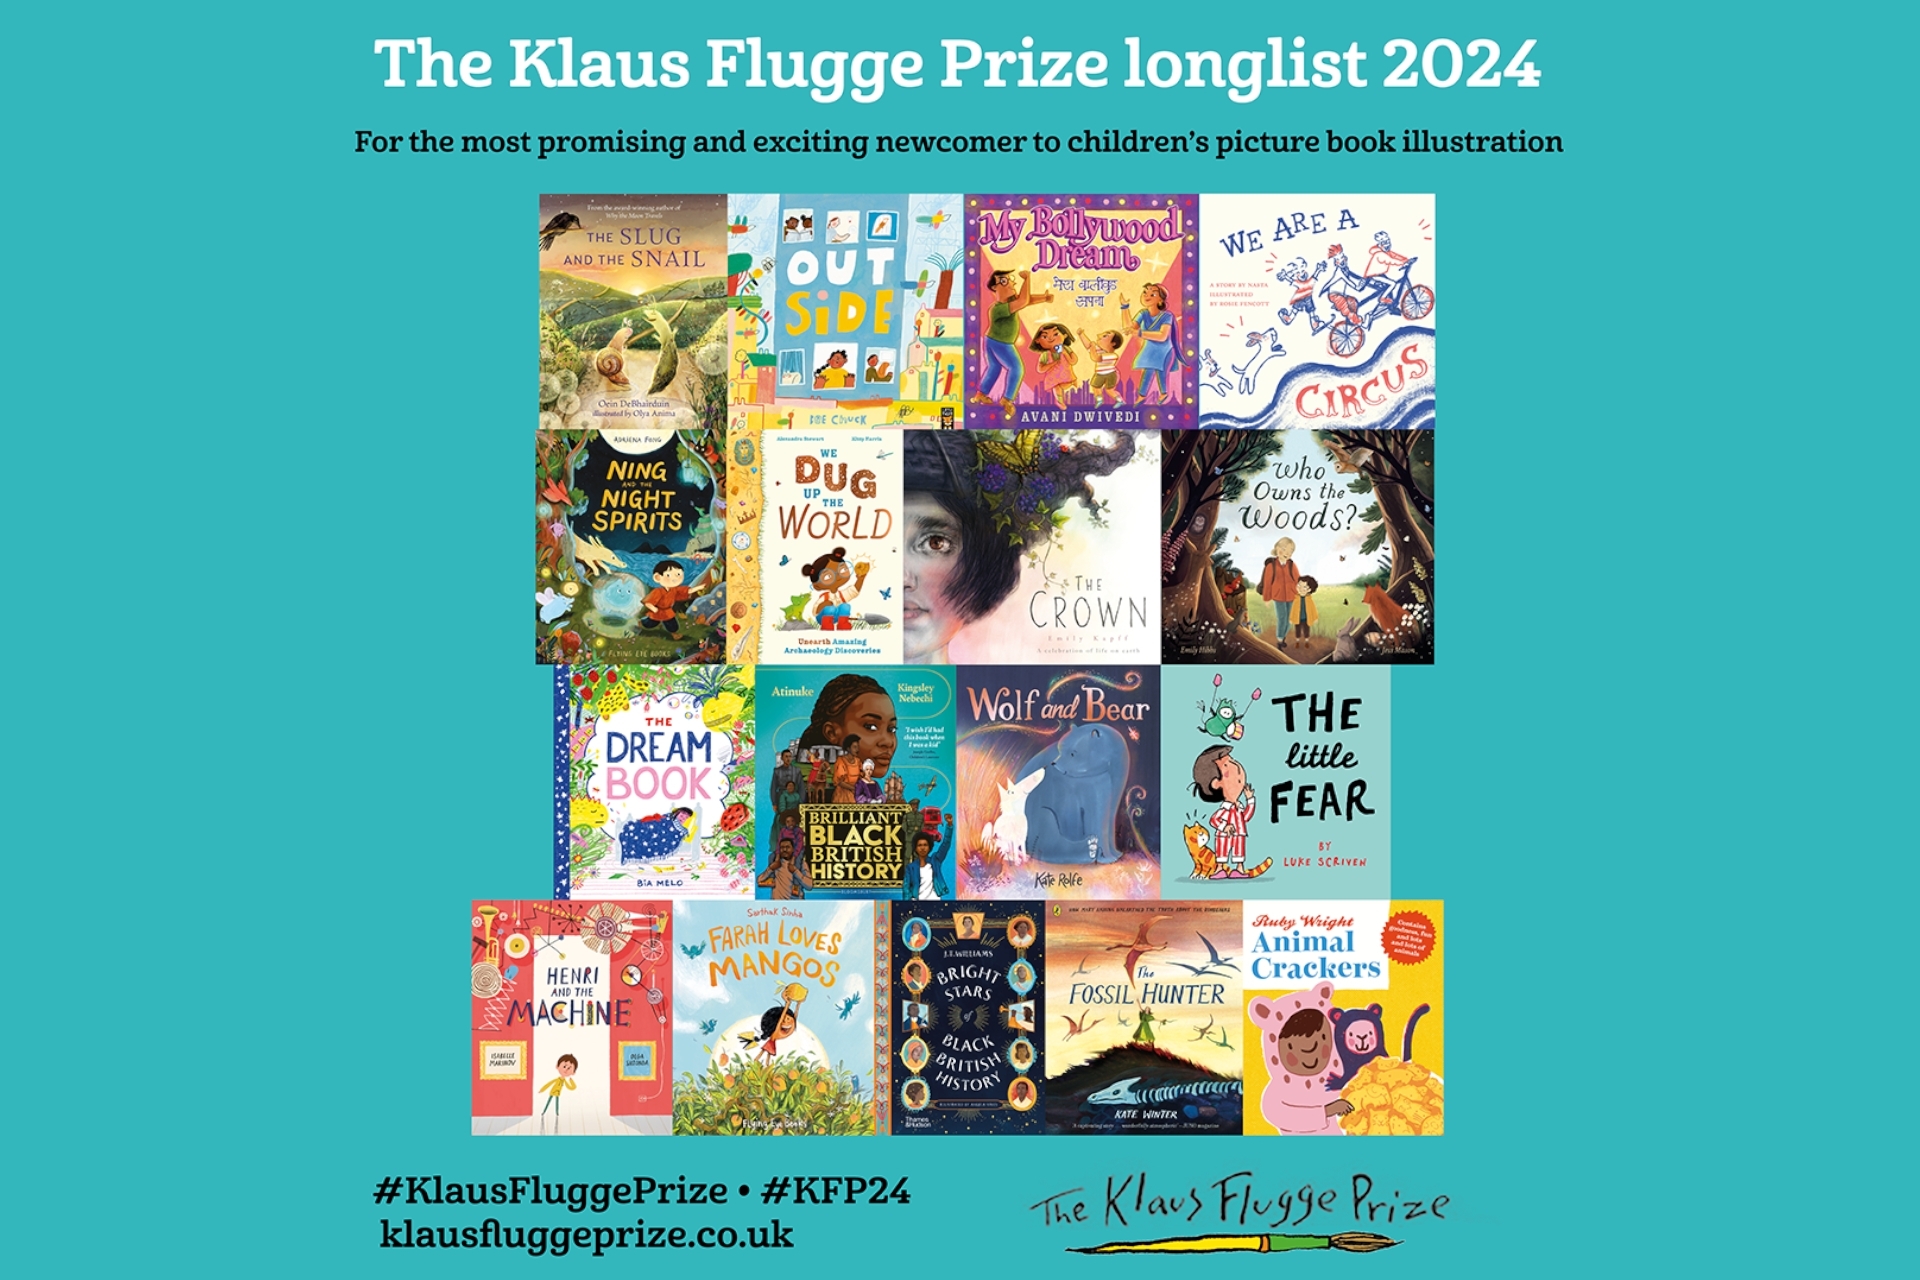 Longlist Announced for the 2024 Klaus Flugge Prize - celebrating the most exciting newcomers to picture book illustration